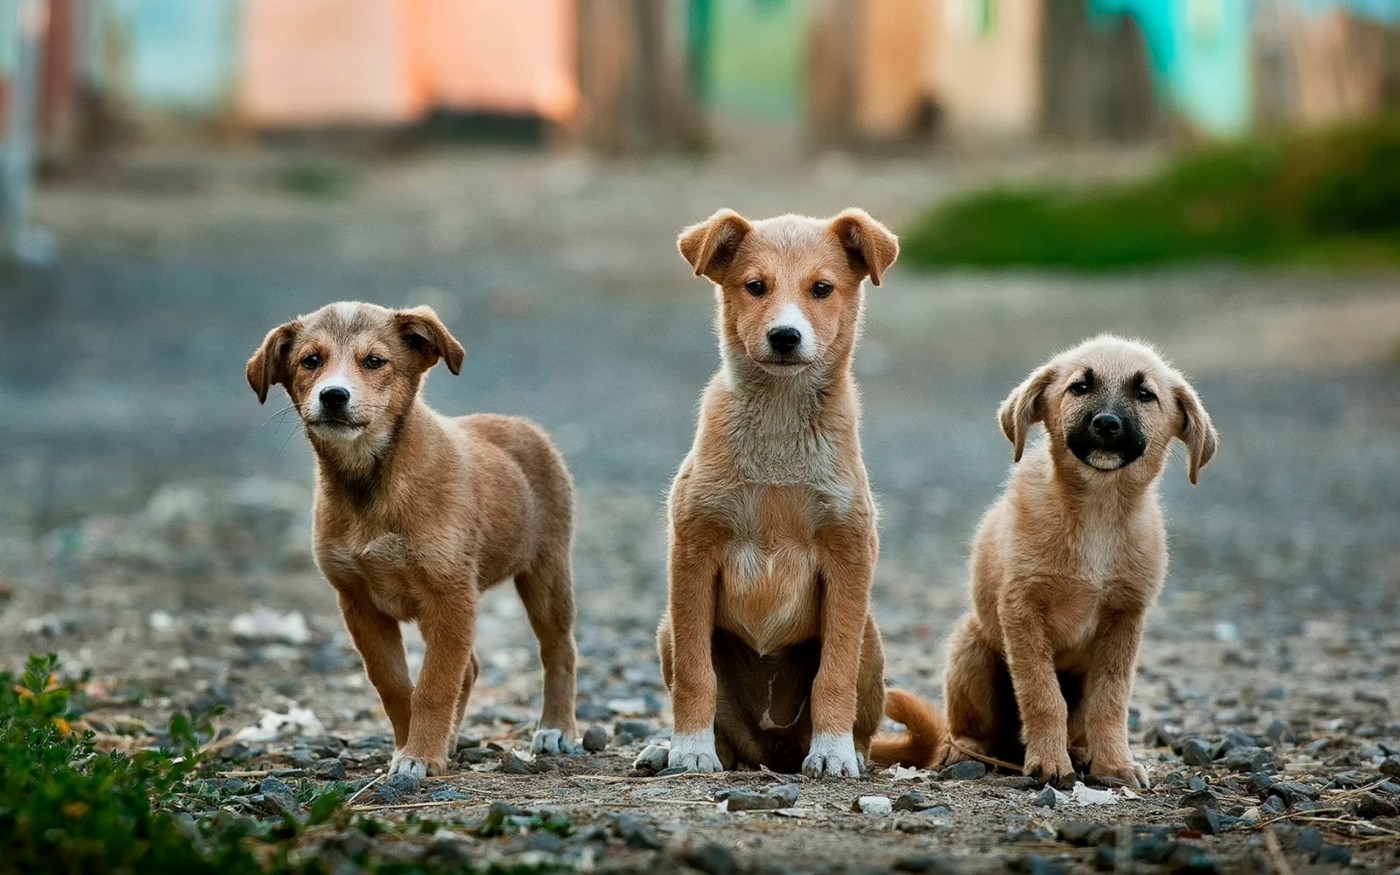 Photo of 3 dogs, used for object detection